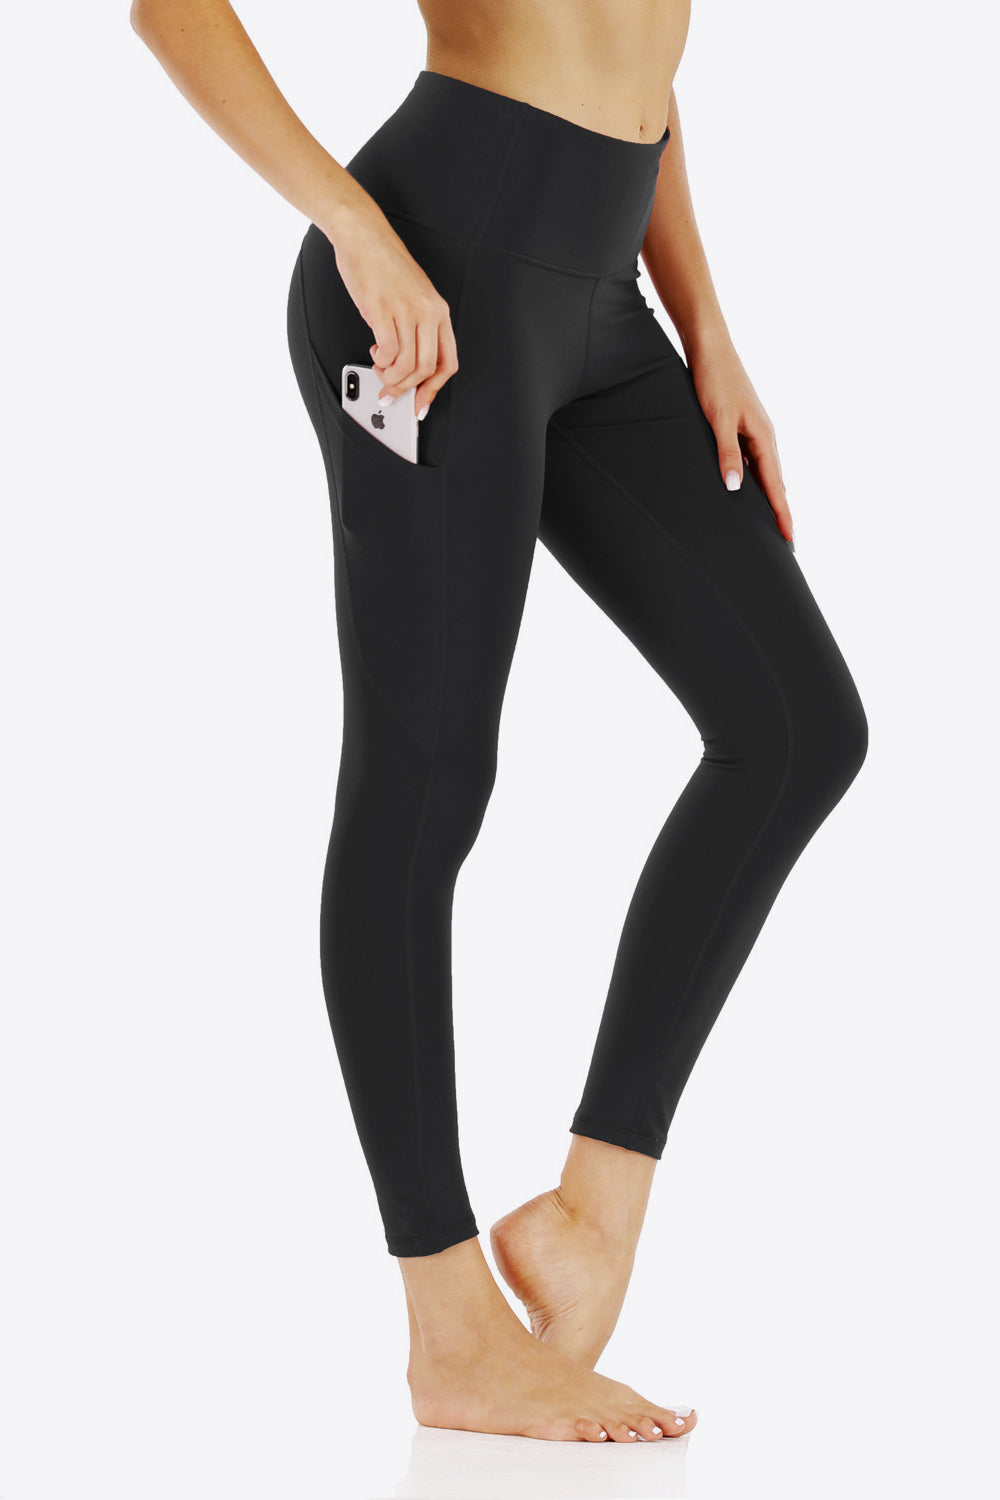 Wide Waistband Sports Leggings with Side Pockets  Krazy Heart Designs Boutique Black S 